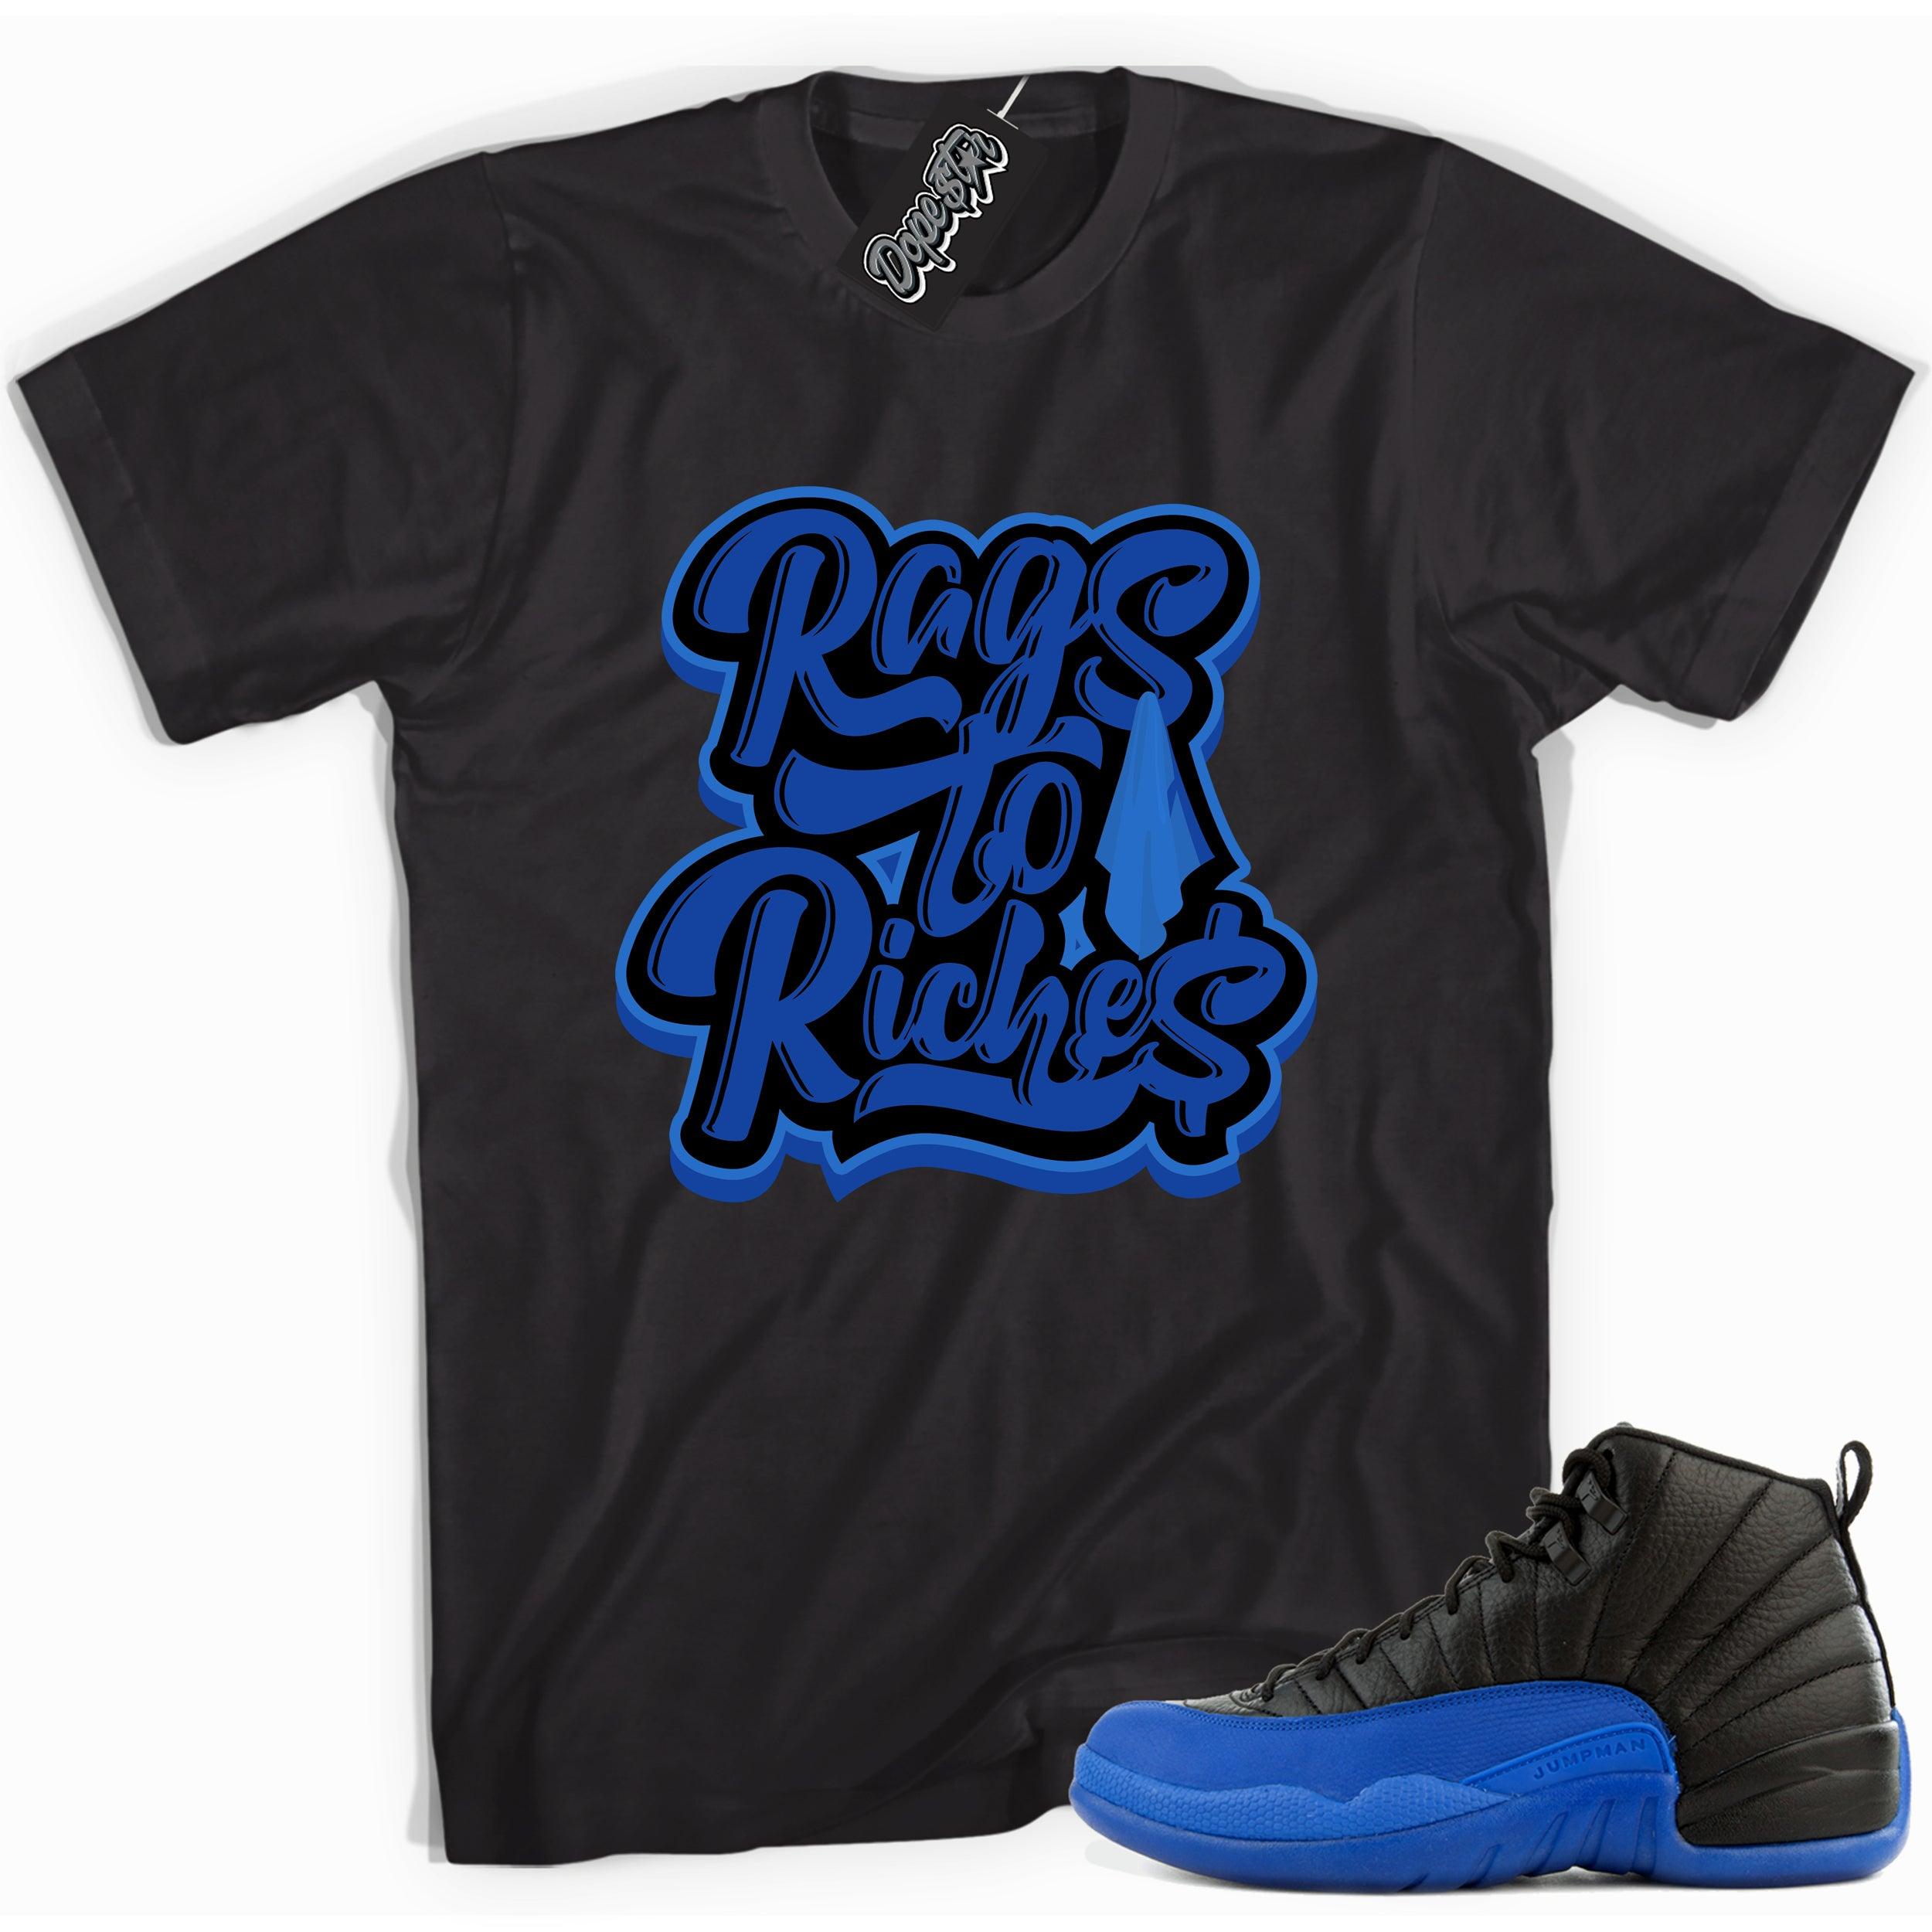 Cool black graphic tee with 'rags to riches' print, that perfectly matches  Air Jordan 12 Retro Black Game Royal sneakers.